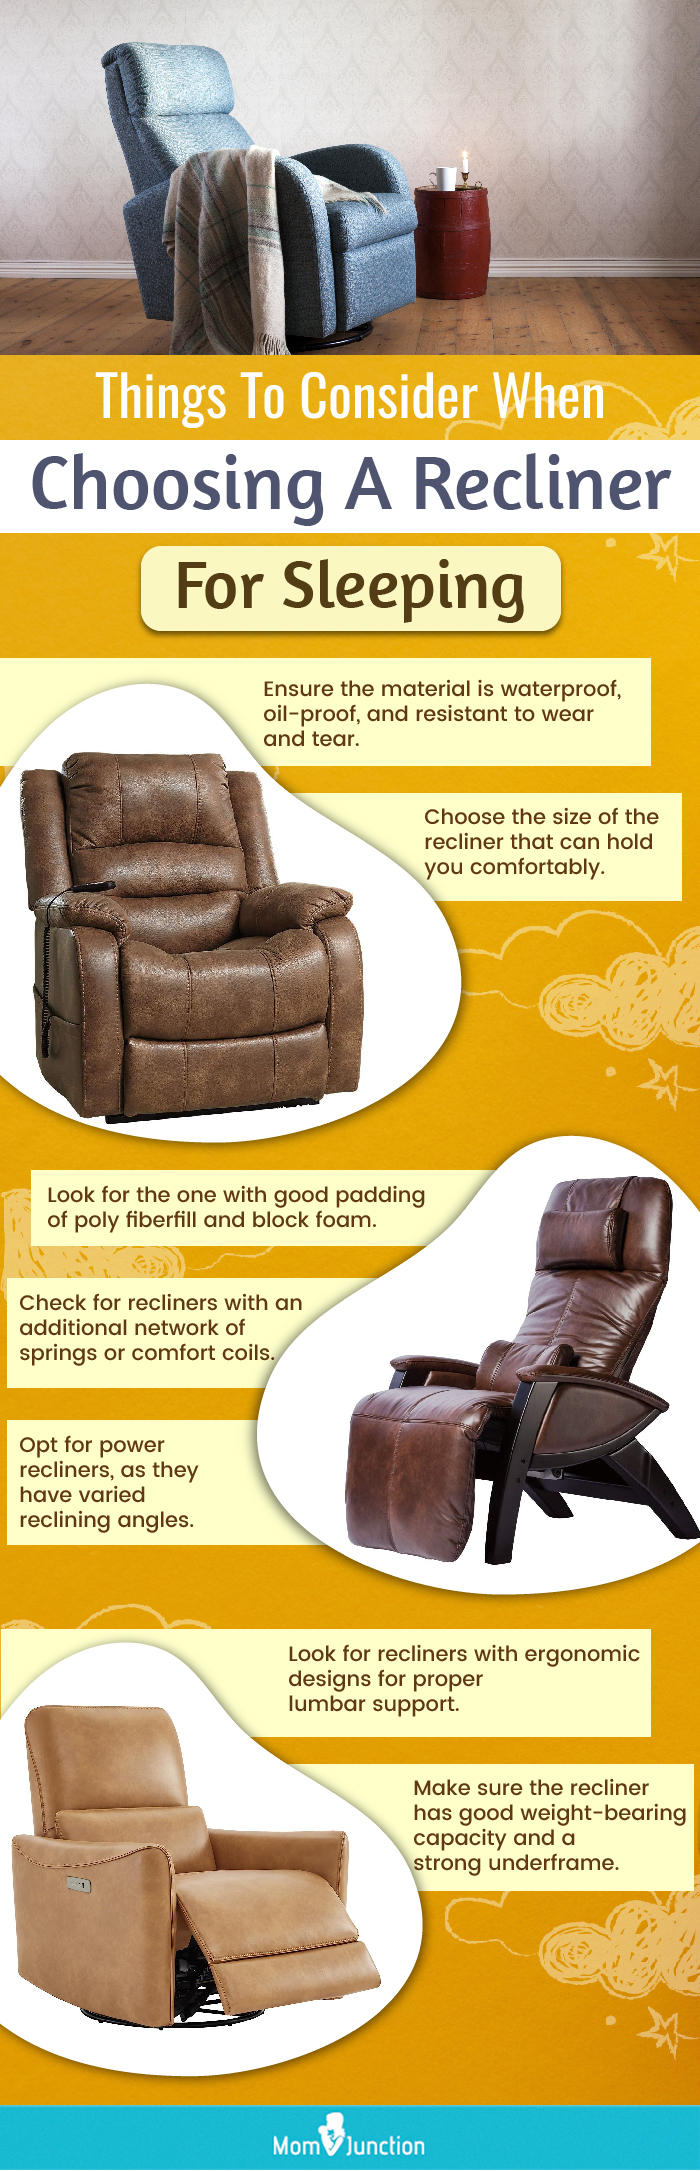 Things To Consider When Choosing A Recliner For Sleeping(infographic)